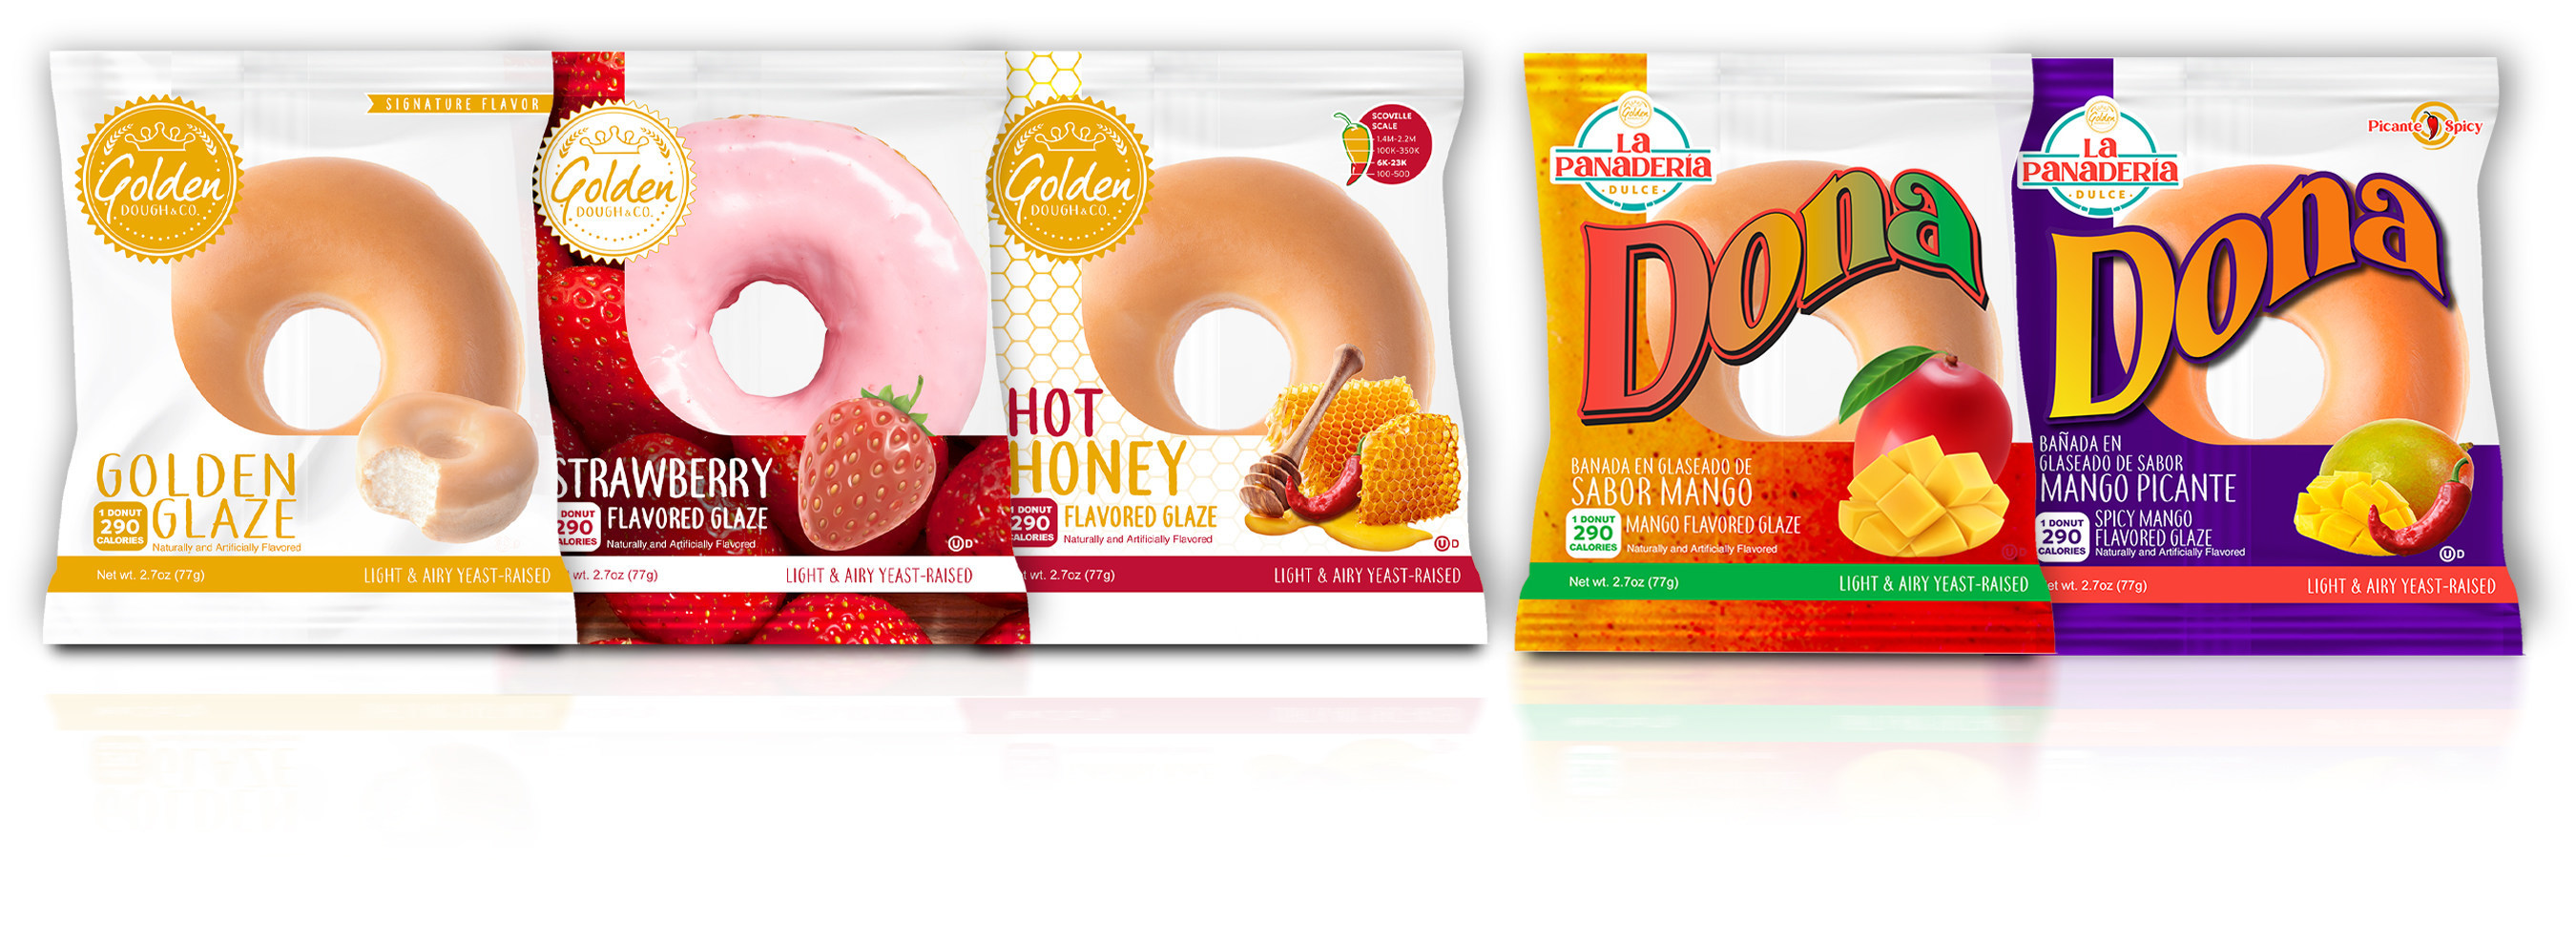 Golden Dough Foods is the first company to introduce individually wrapped, full-sized yeast-raised donuts with extended shelf life at mass scale. At the Sweets & Snacks Show, the Florida-based startup will unveil two brands: Golden & Co. and La Panadería Dulce.